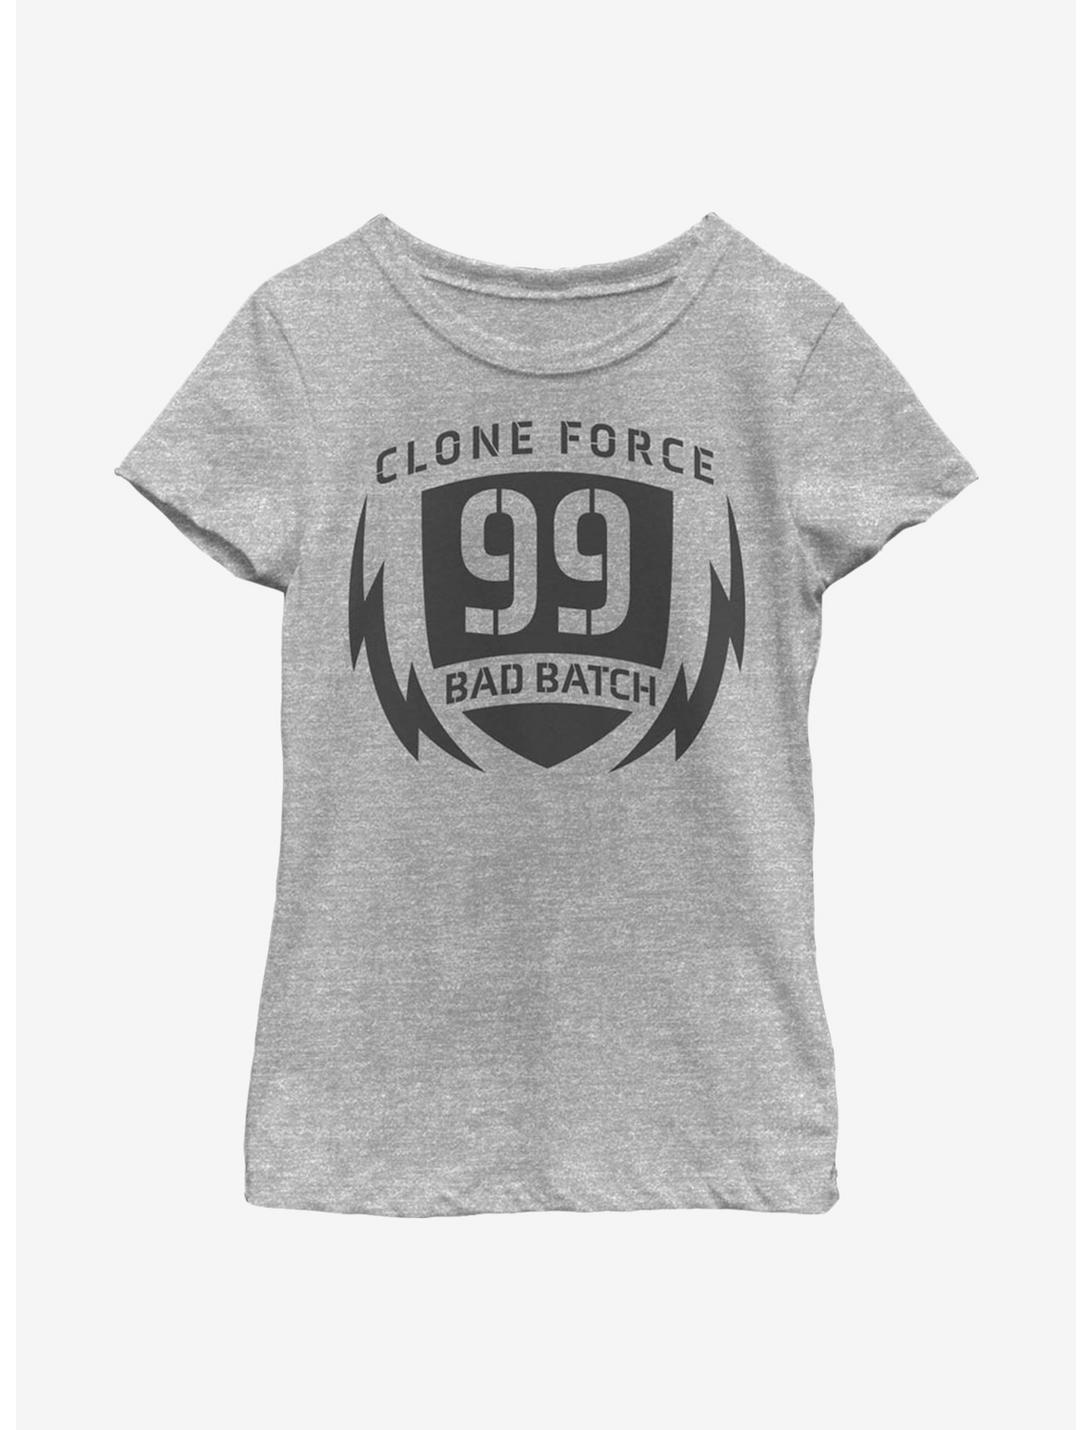 Star Wars: The Bad Batch Clone Force Badge Youth Girls T-Shirt, ATH HTR, hi-res